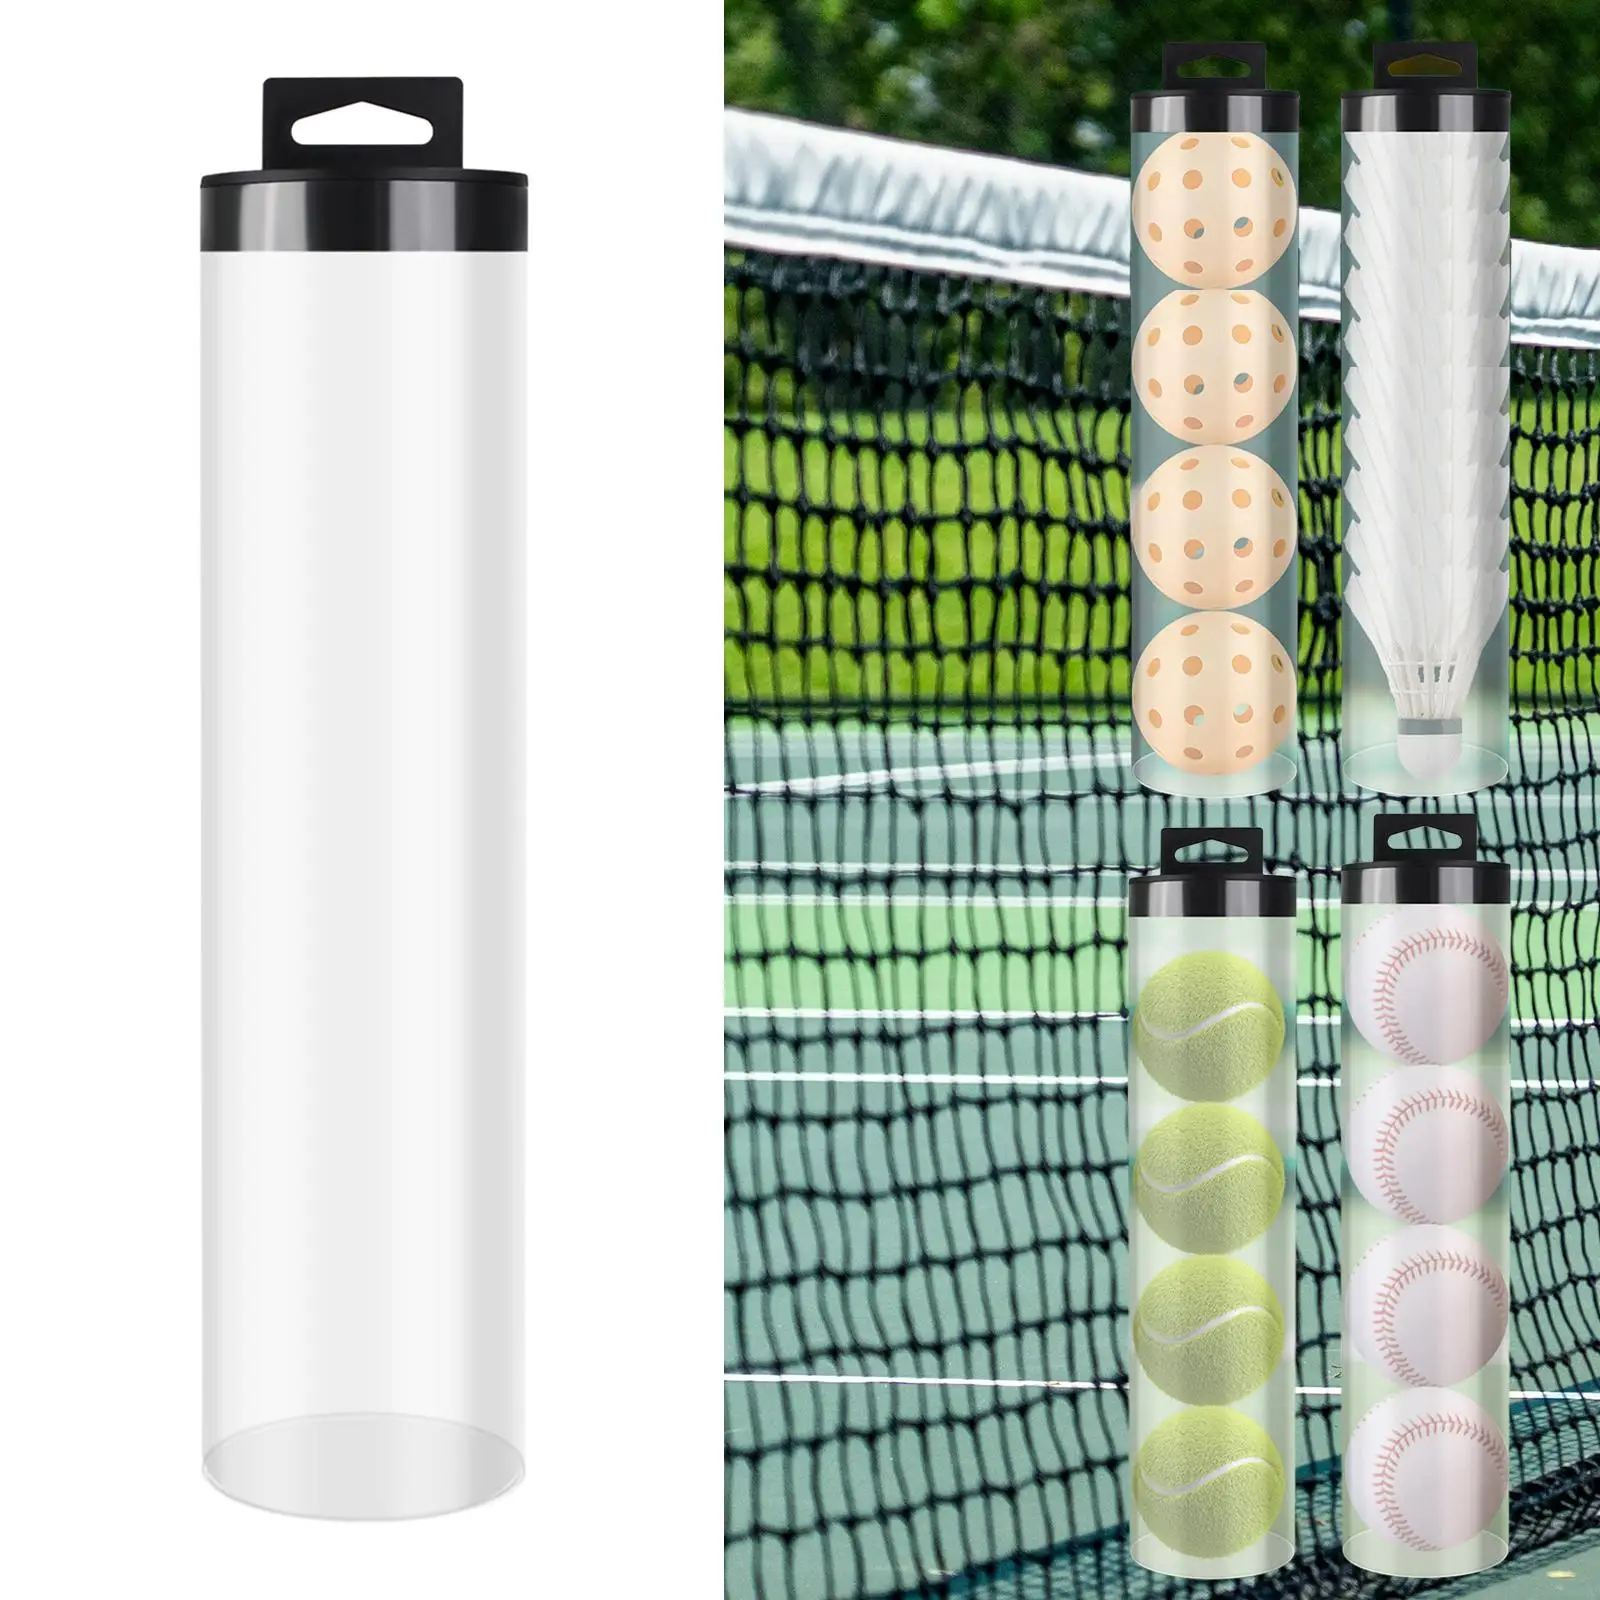 Tennis Ball Can Holder Storage Box, with Cover Lightweight Durable Tennis Tube Pickleball Ball Storage Container for Practice